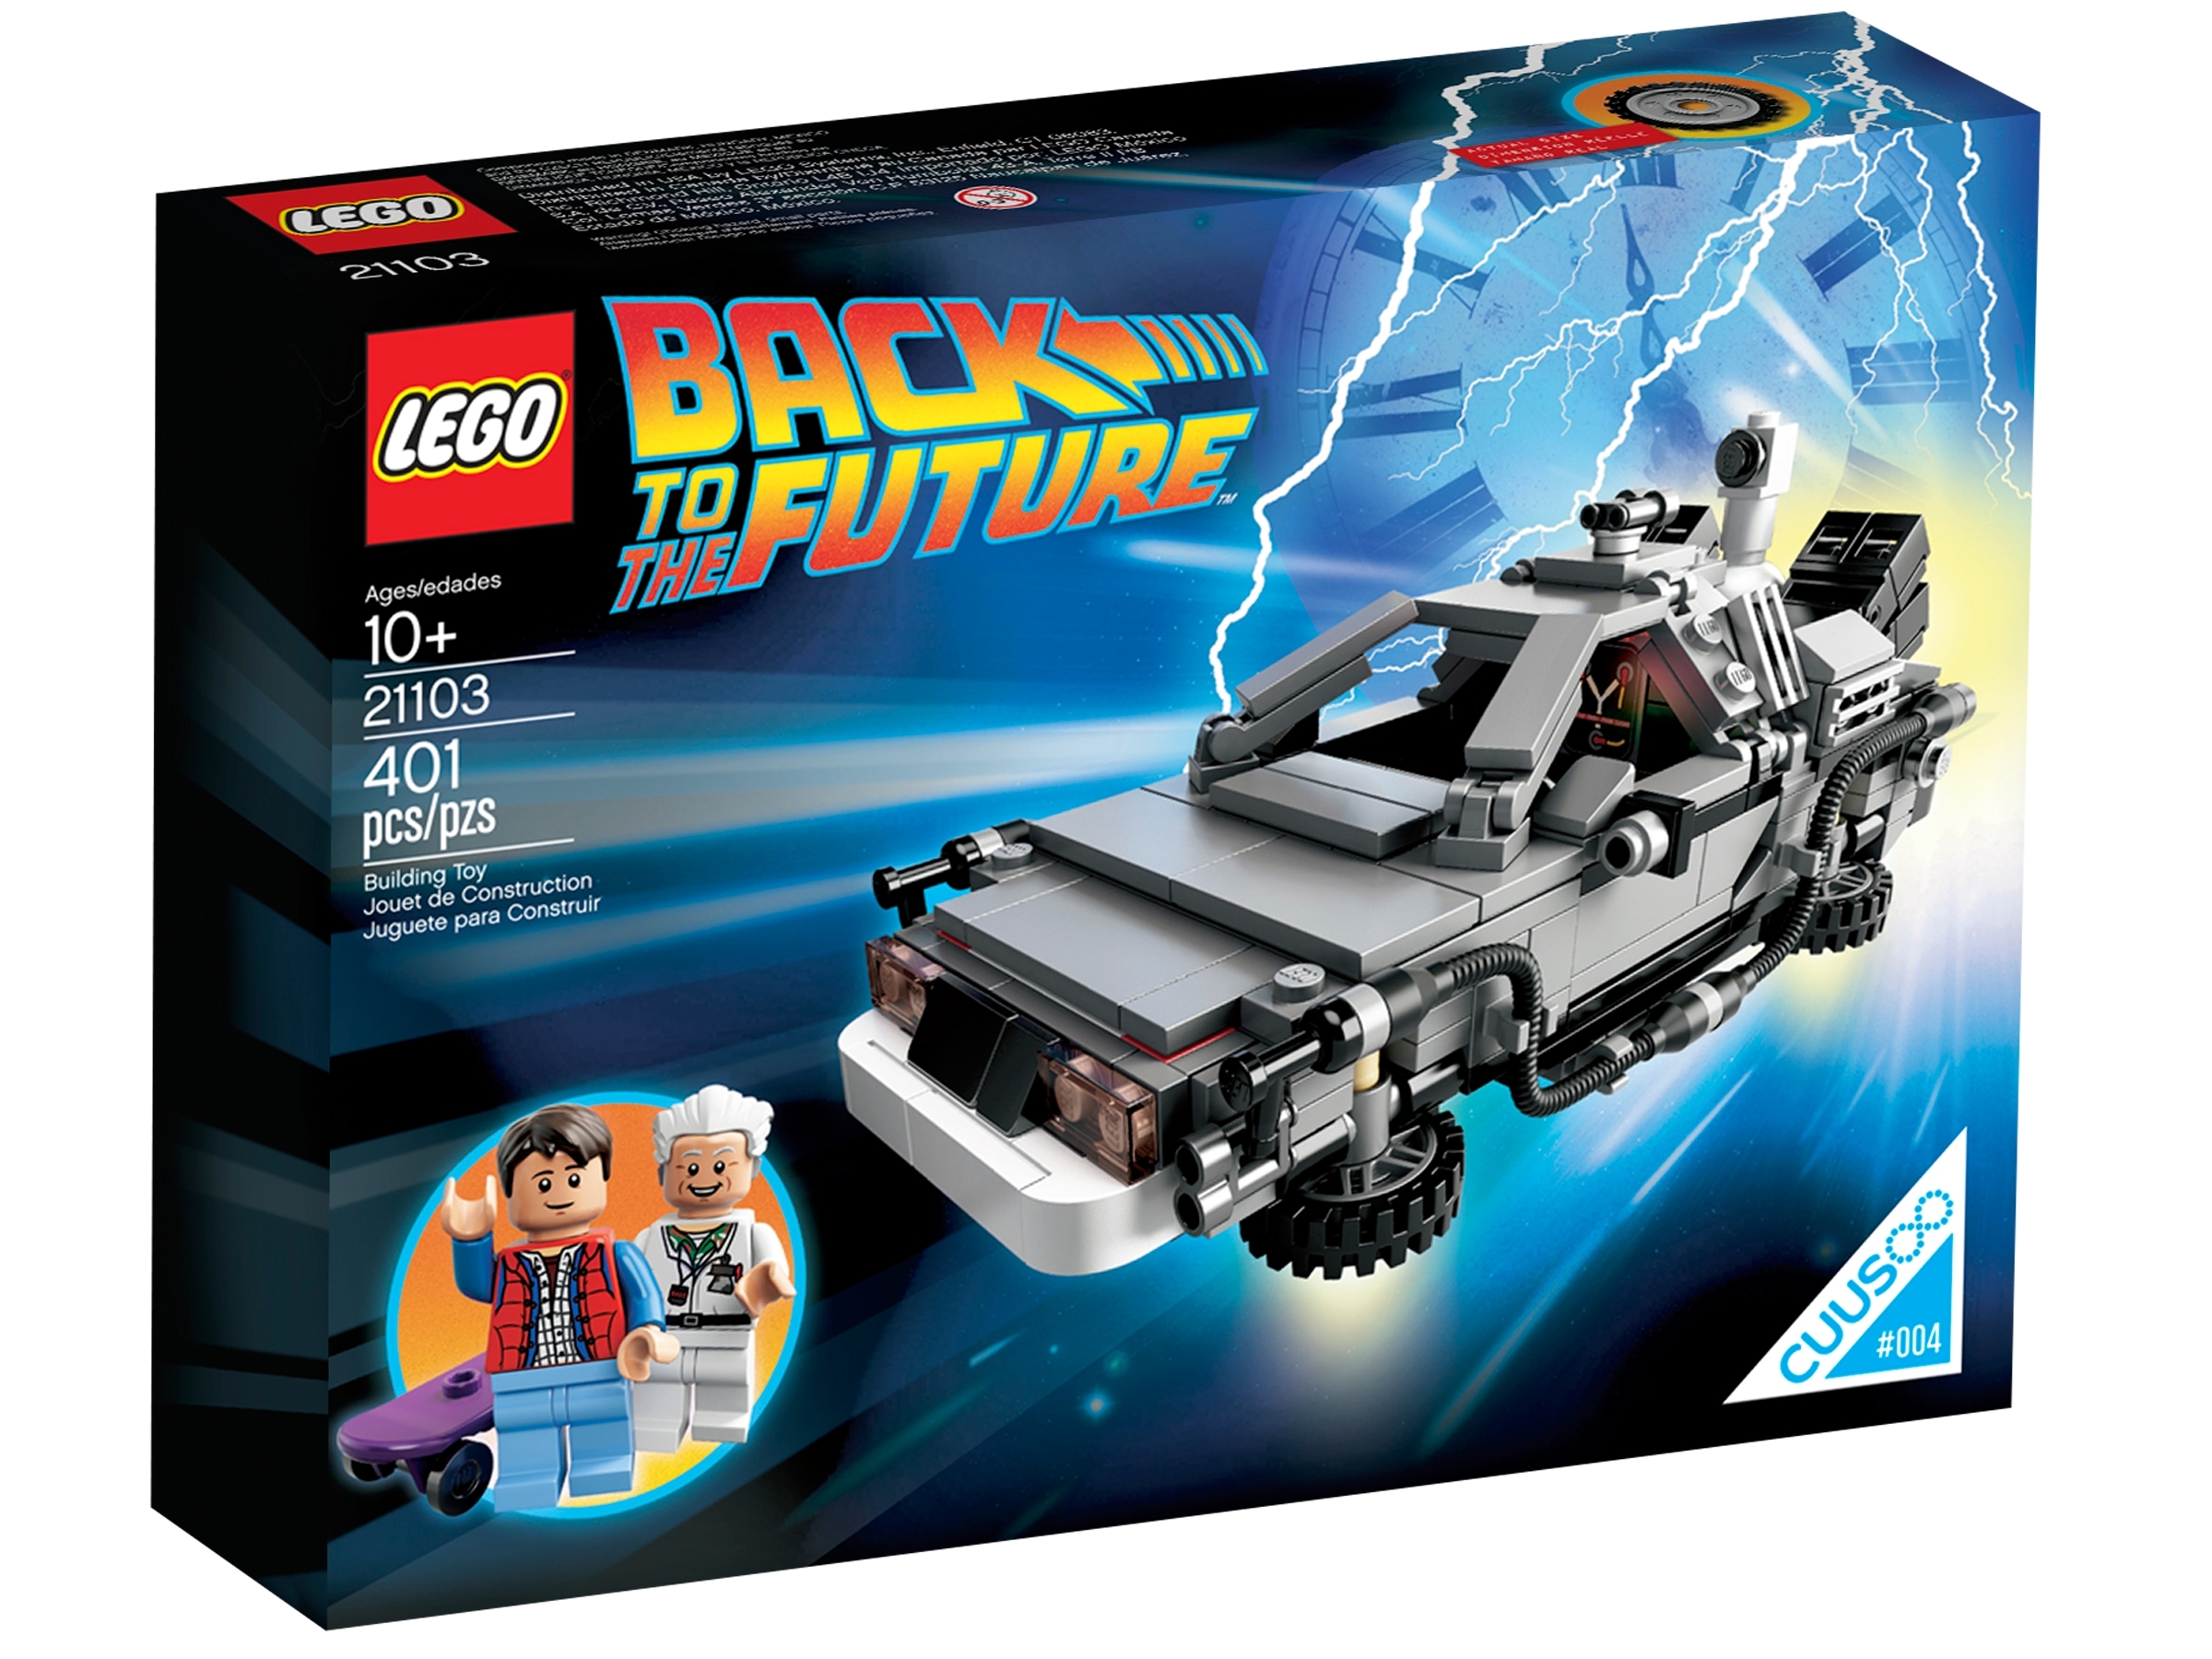 Lego BACK TO THE FUTURE DELOREAN - Epic TIME TRAVEL! Cuusoo #004 Set 21103  time-lapse 